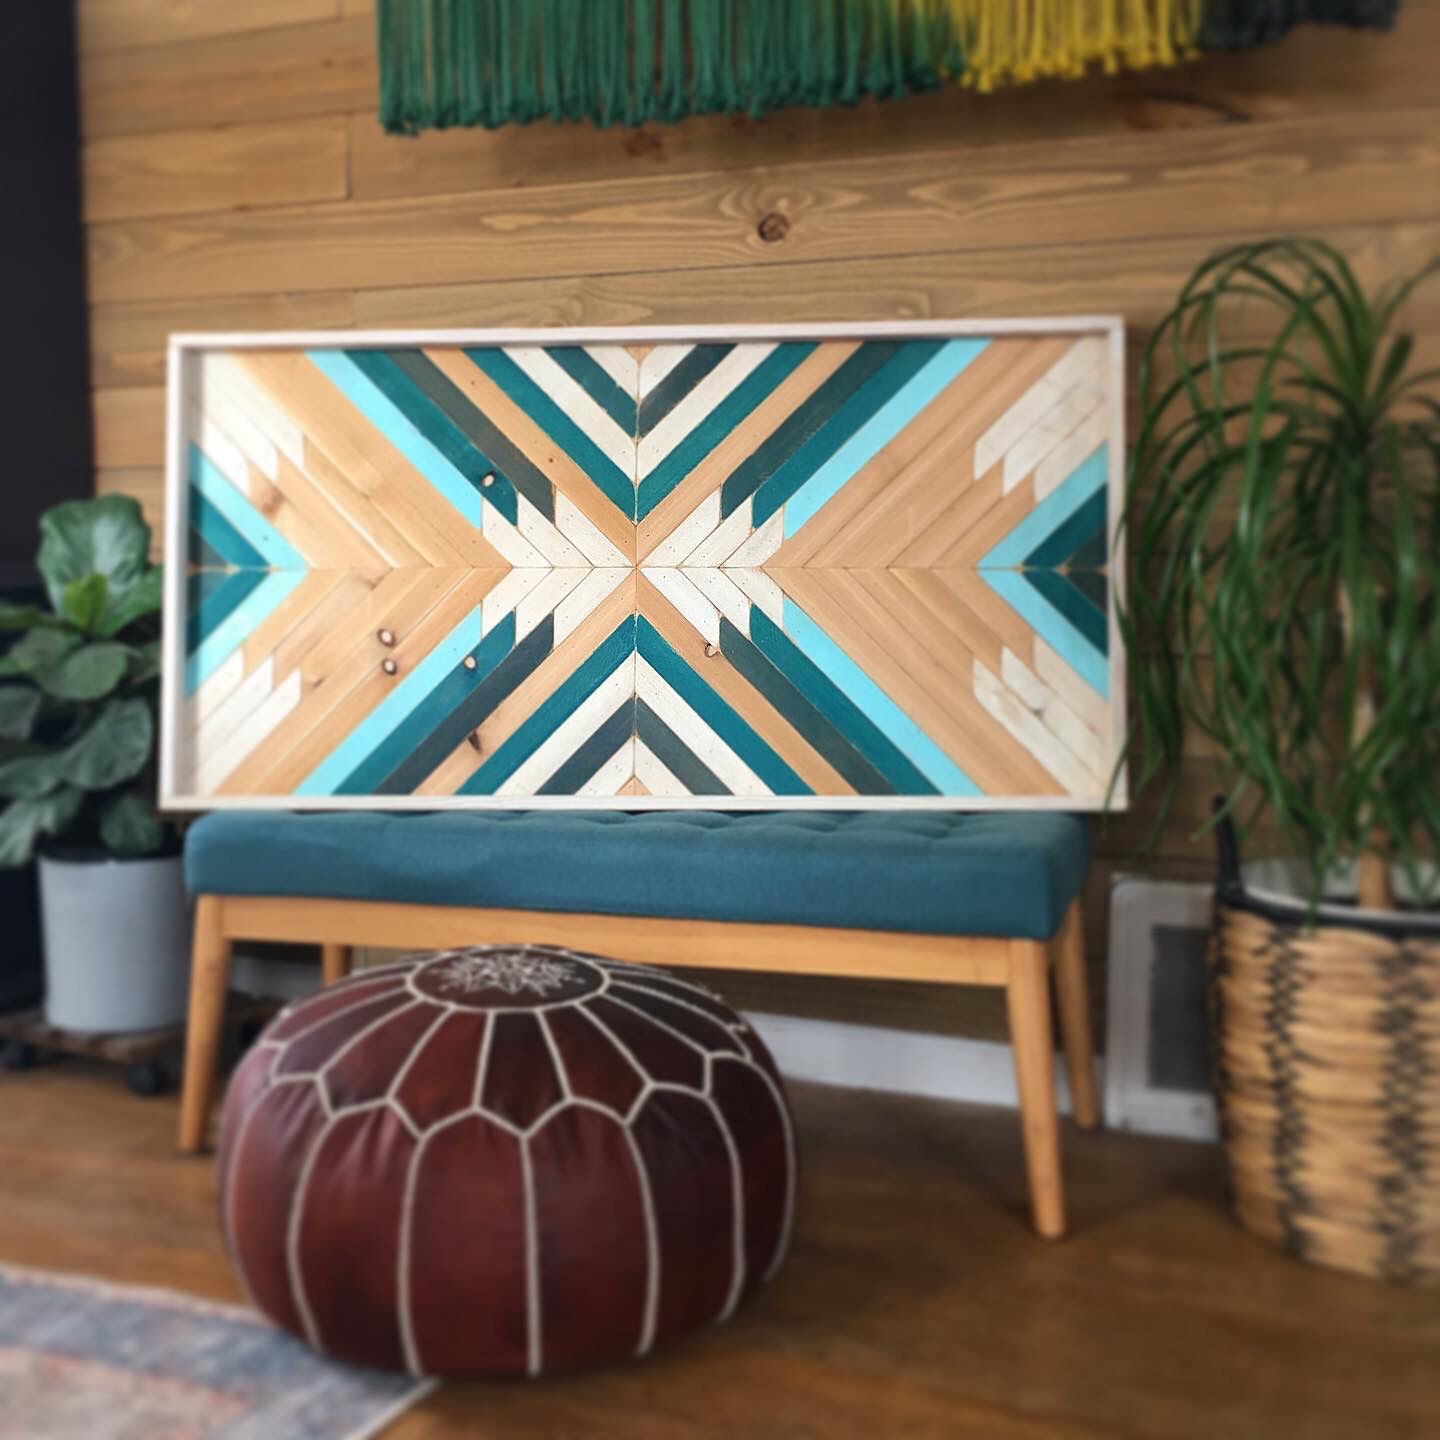 Hand Crafted Wooden Wall Art